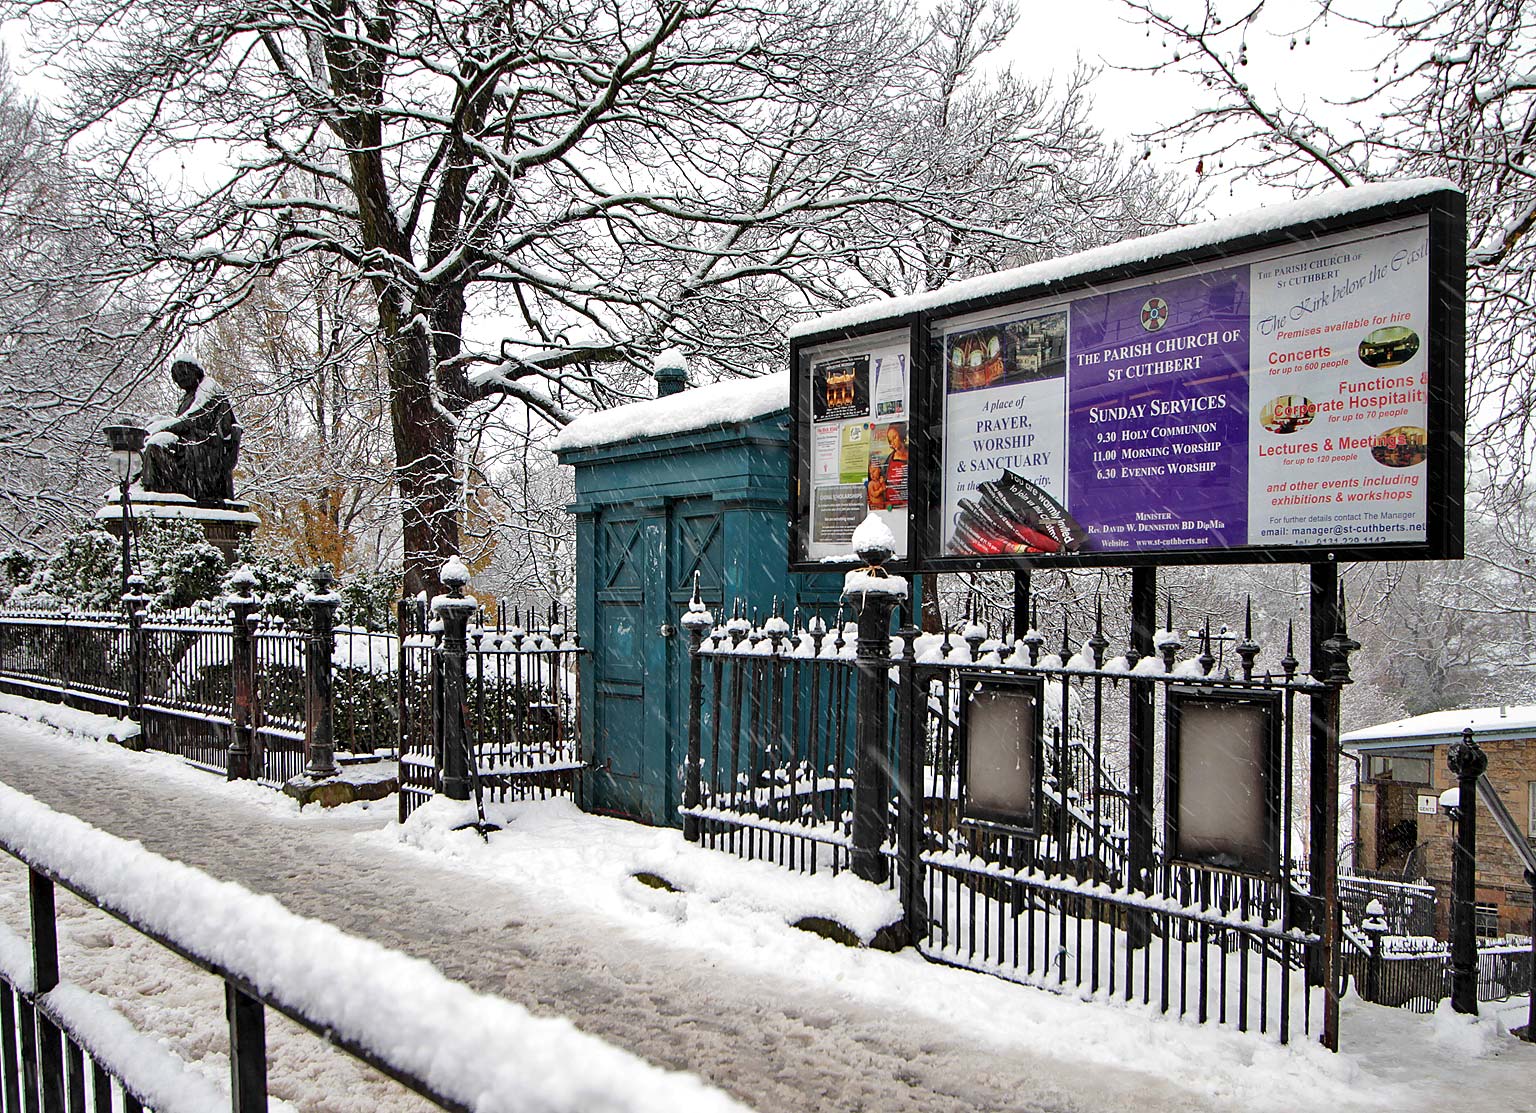 Statue, Police Box and Notice Board, in the snow, at the West End of Princes Street  -  December 2010